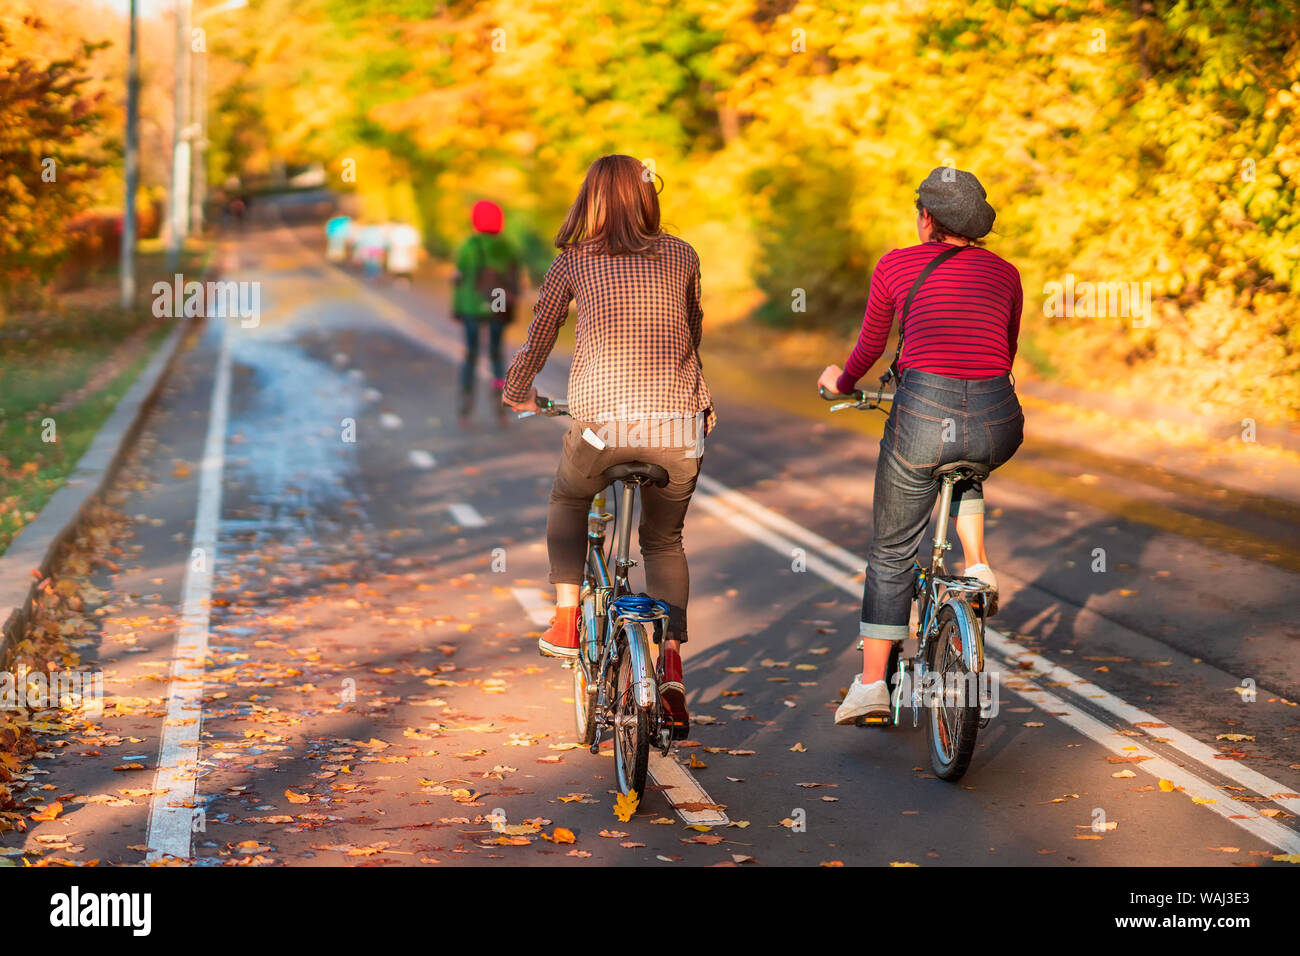 Unrecognizable girls riding bike in autumn park, bright colorful trees, sunny day, fall foliage background. Healthy lifestyle, leisure activity Stock Photo